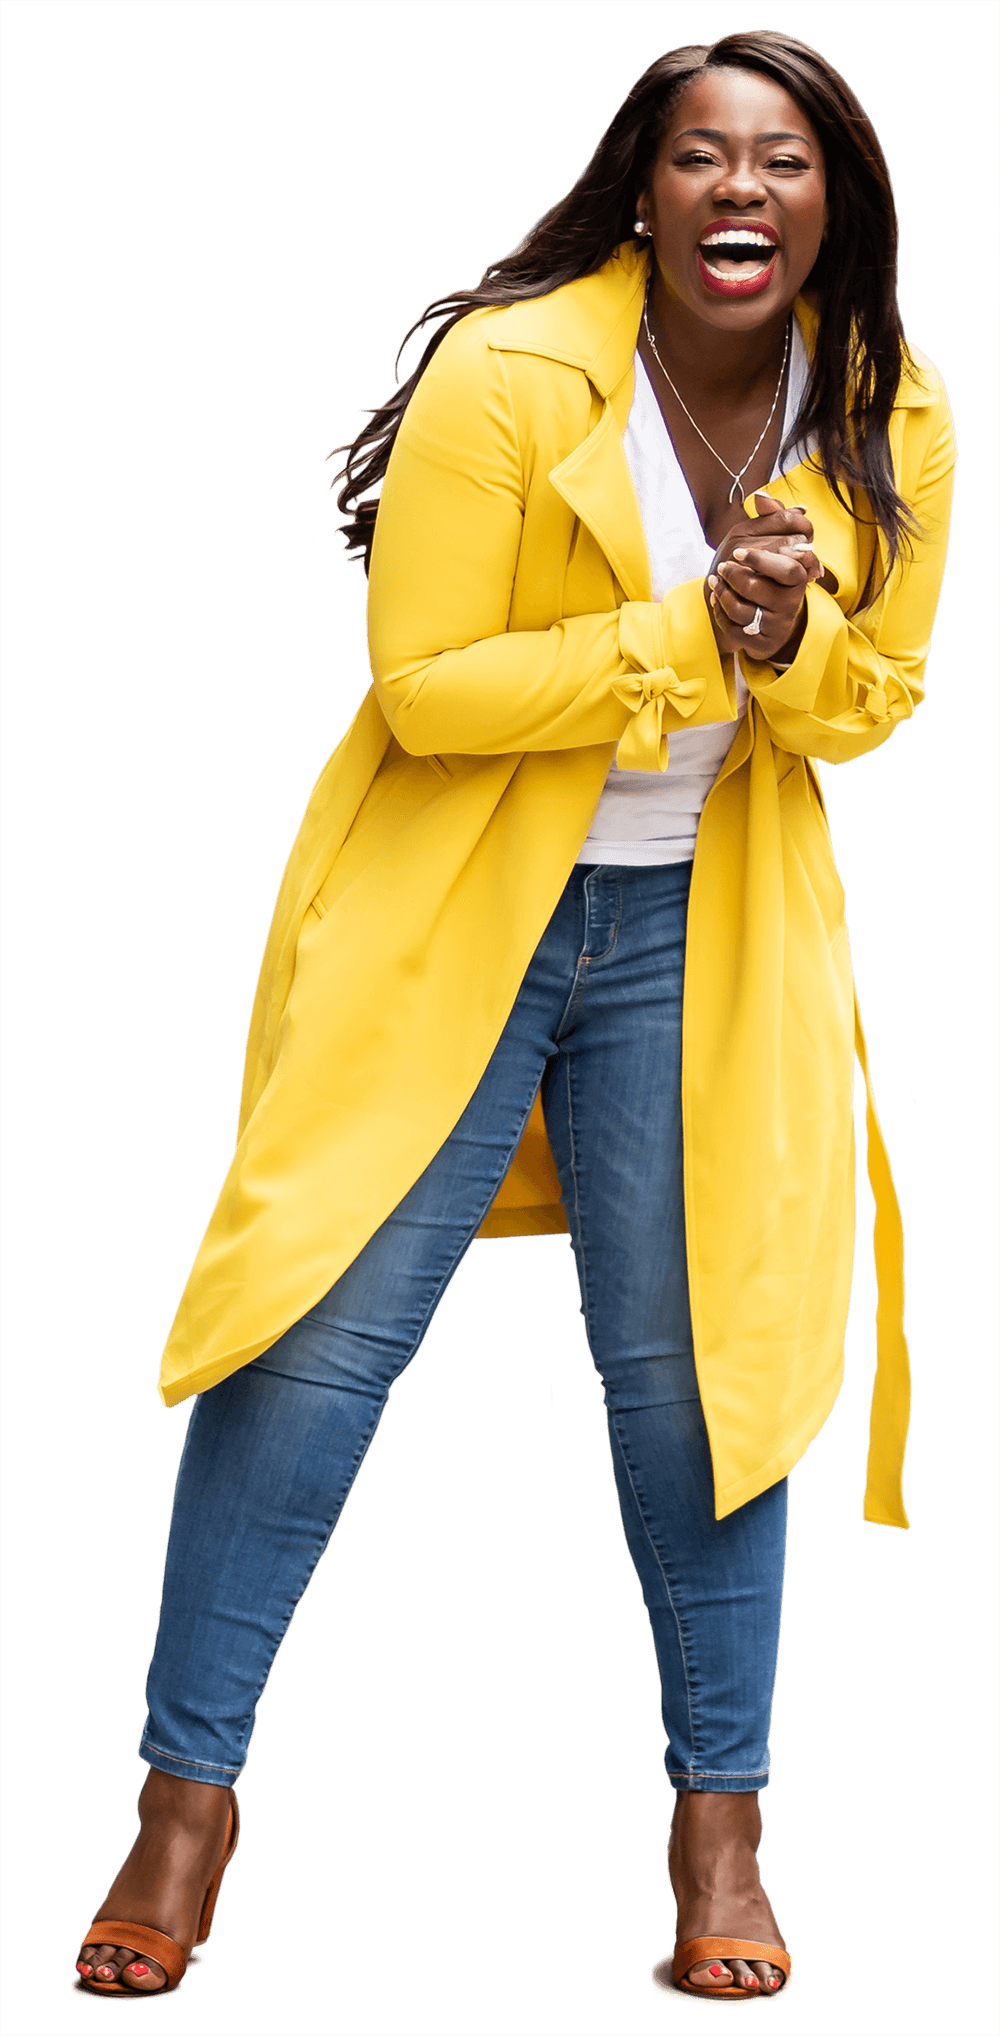 Enthusiastic Nicole in a bright yellow jacket